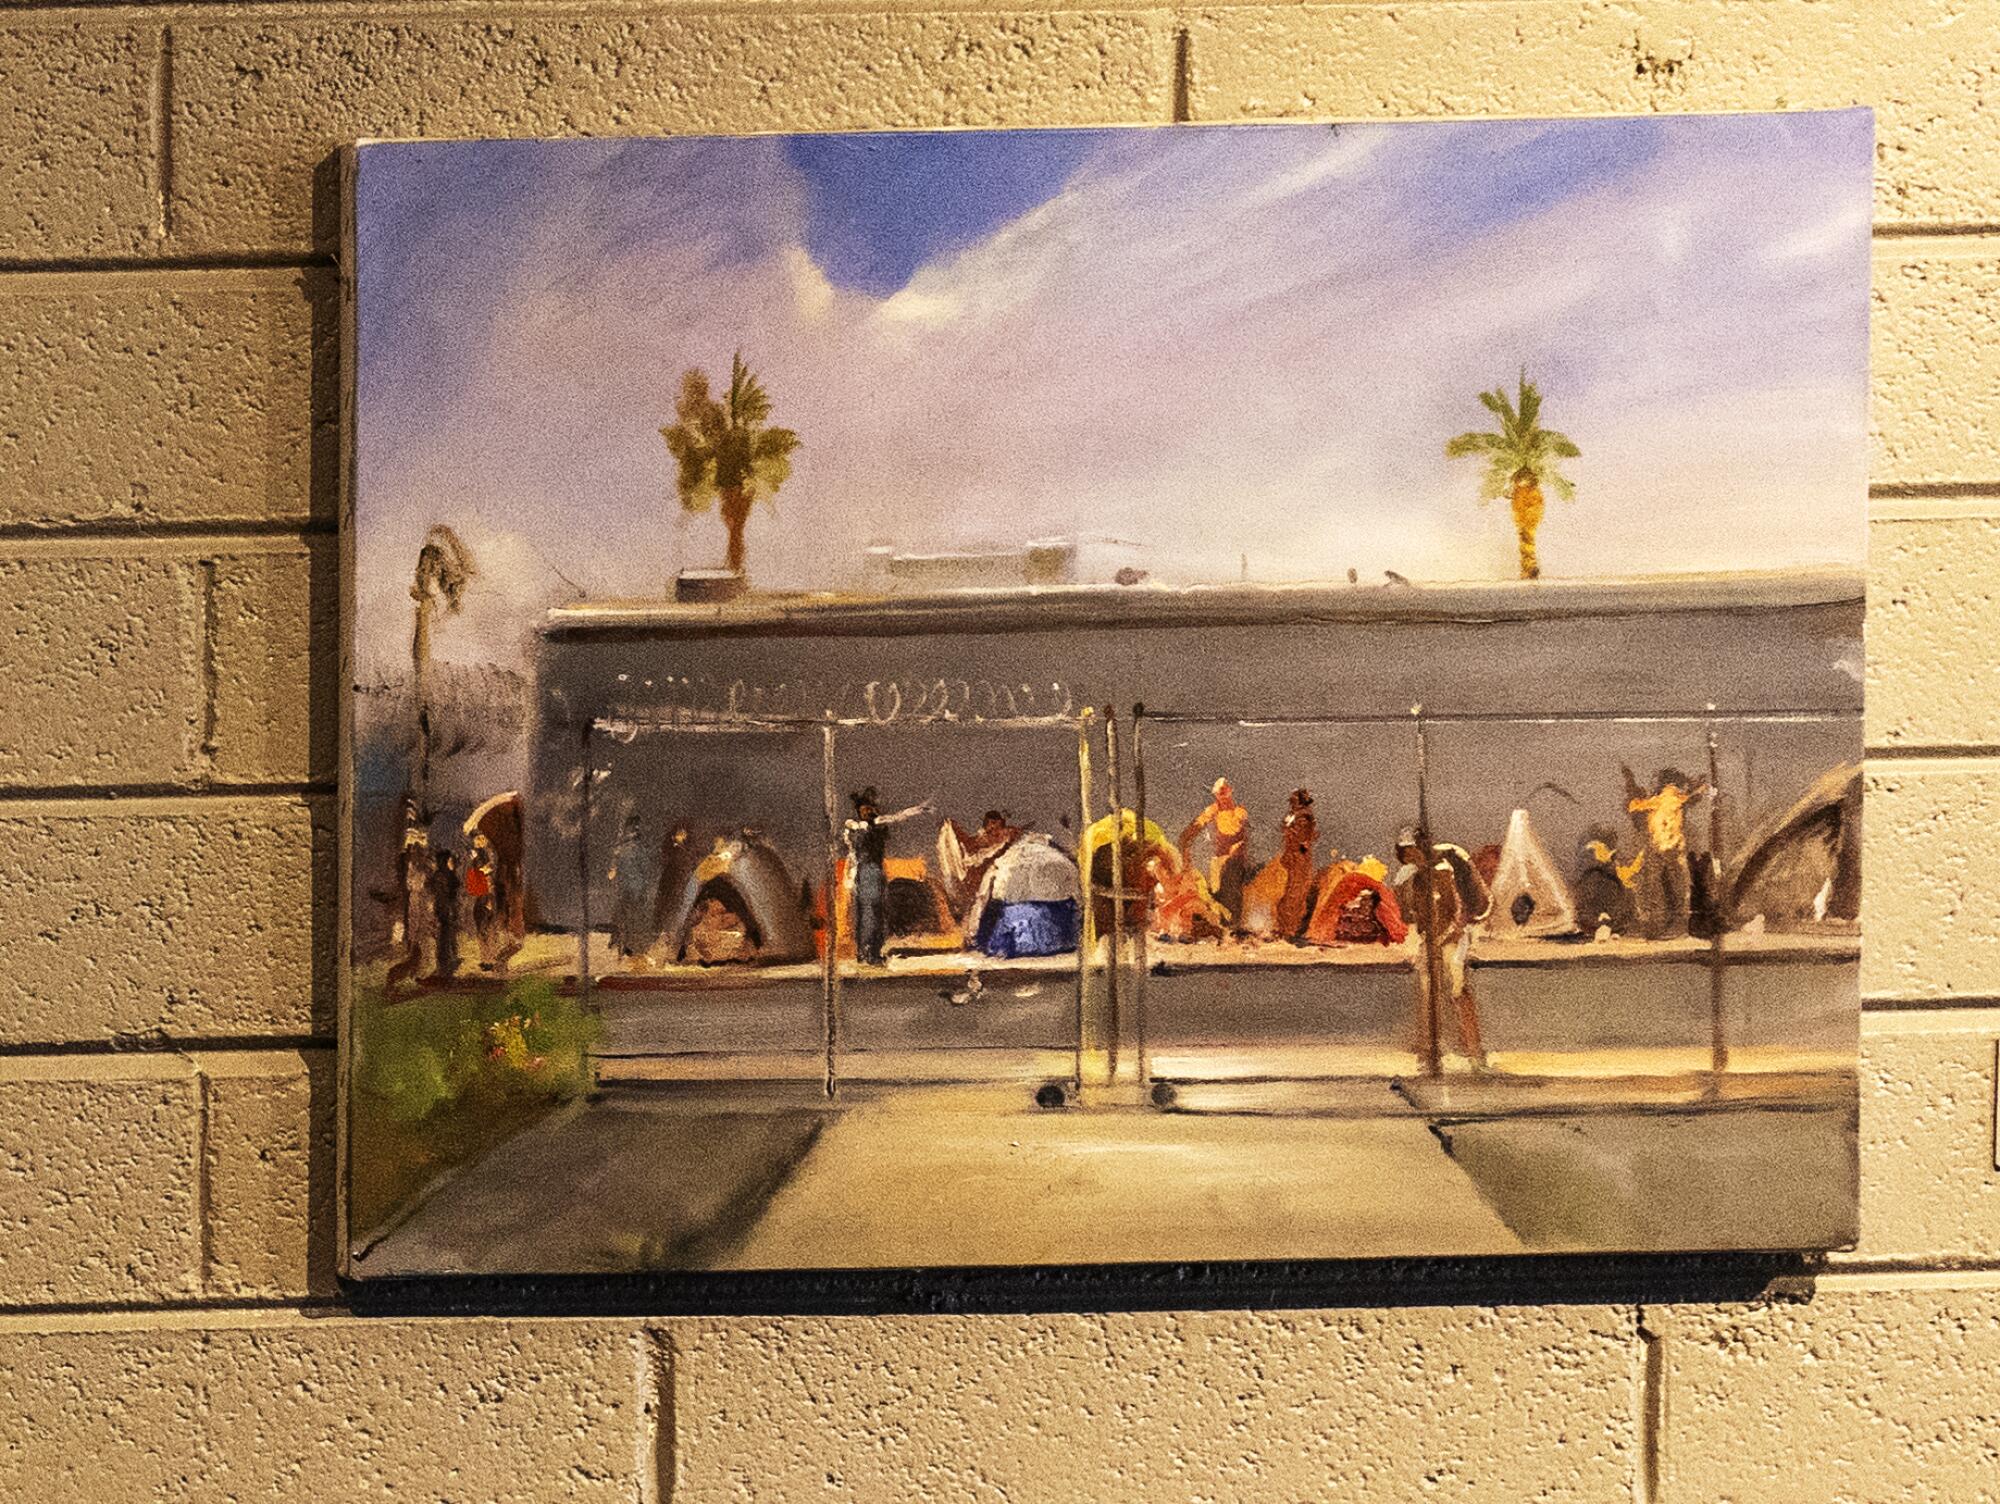 One of Joel Coplin's paintings is a real-life scene of a homeless camp outside his gallery and 